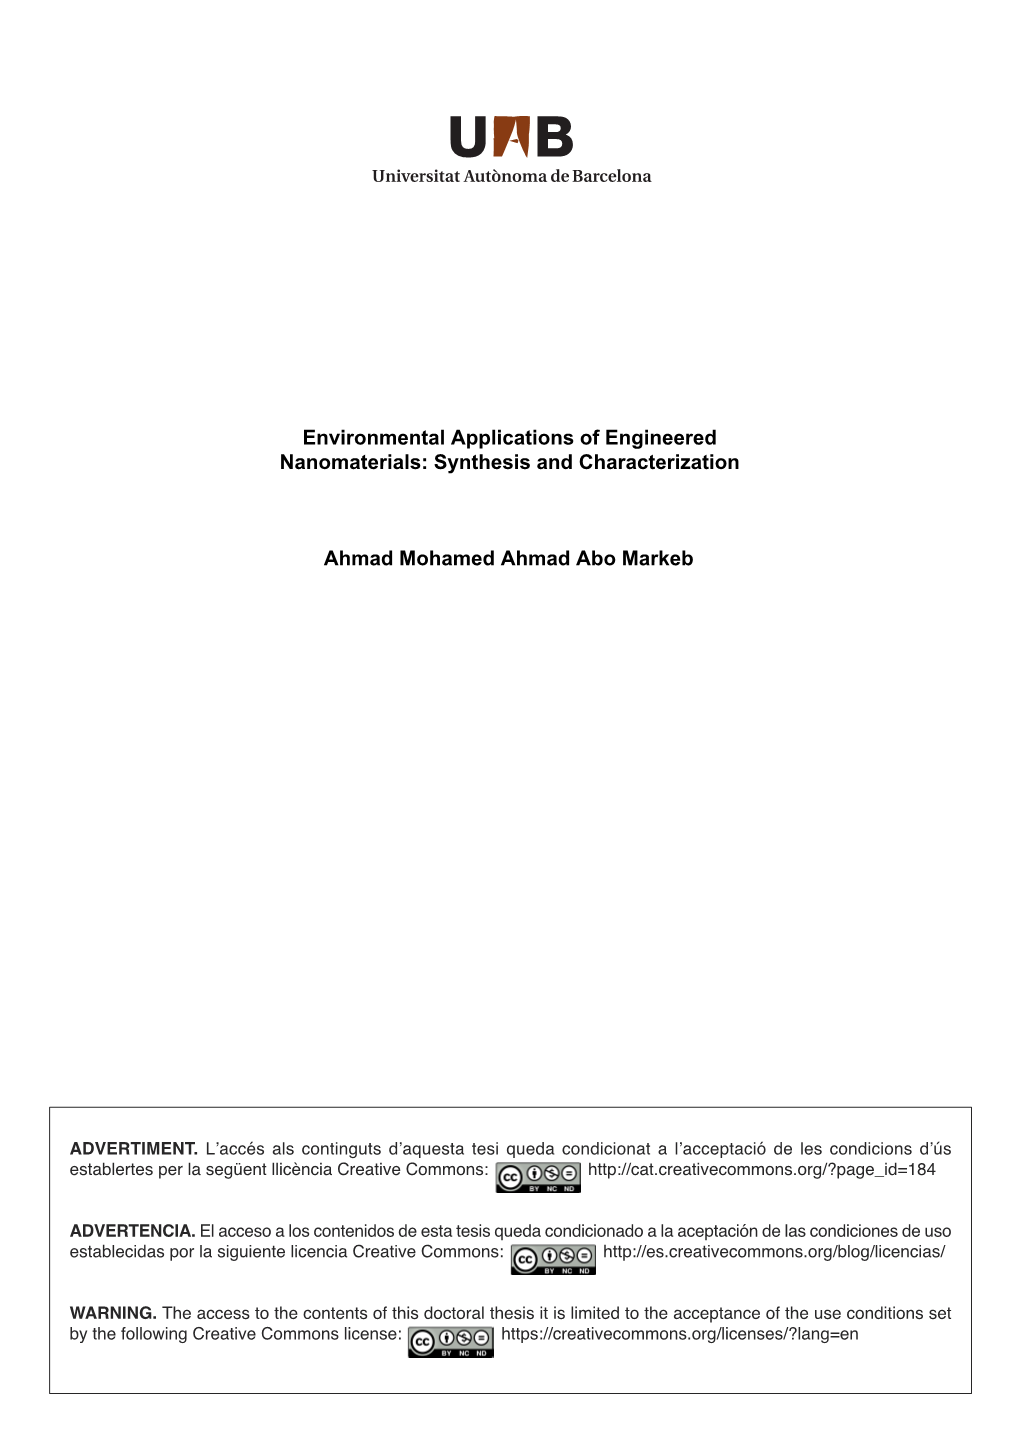 Environmental Applications of Engineered Nanomaterials: Synthesis and Characterization